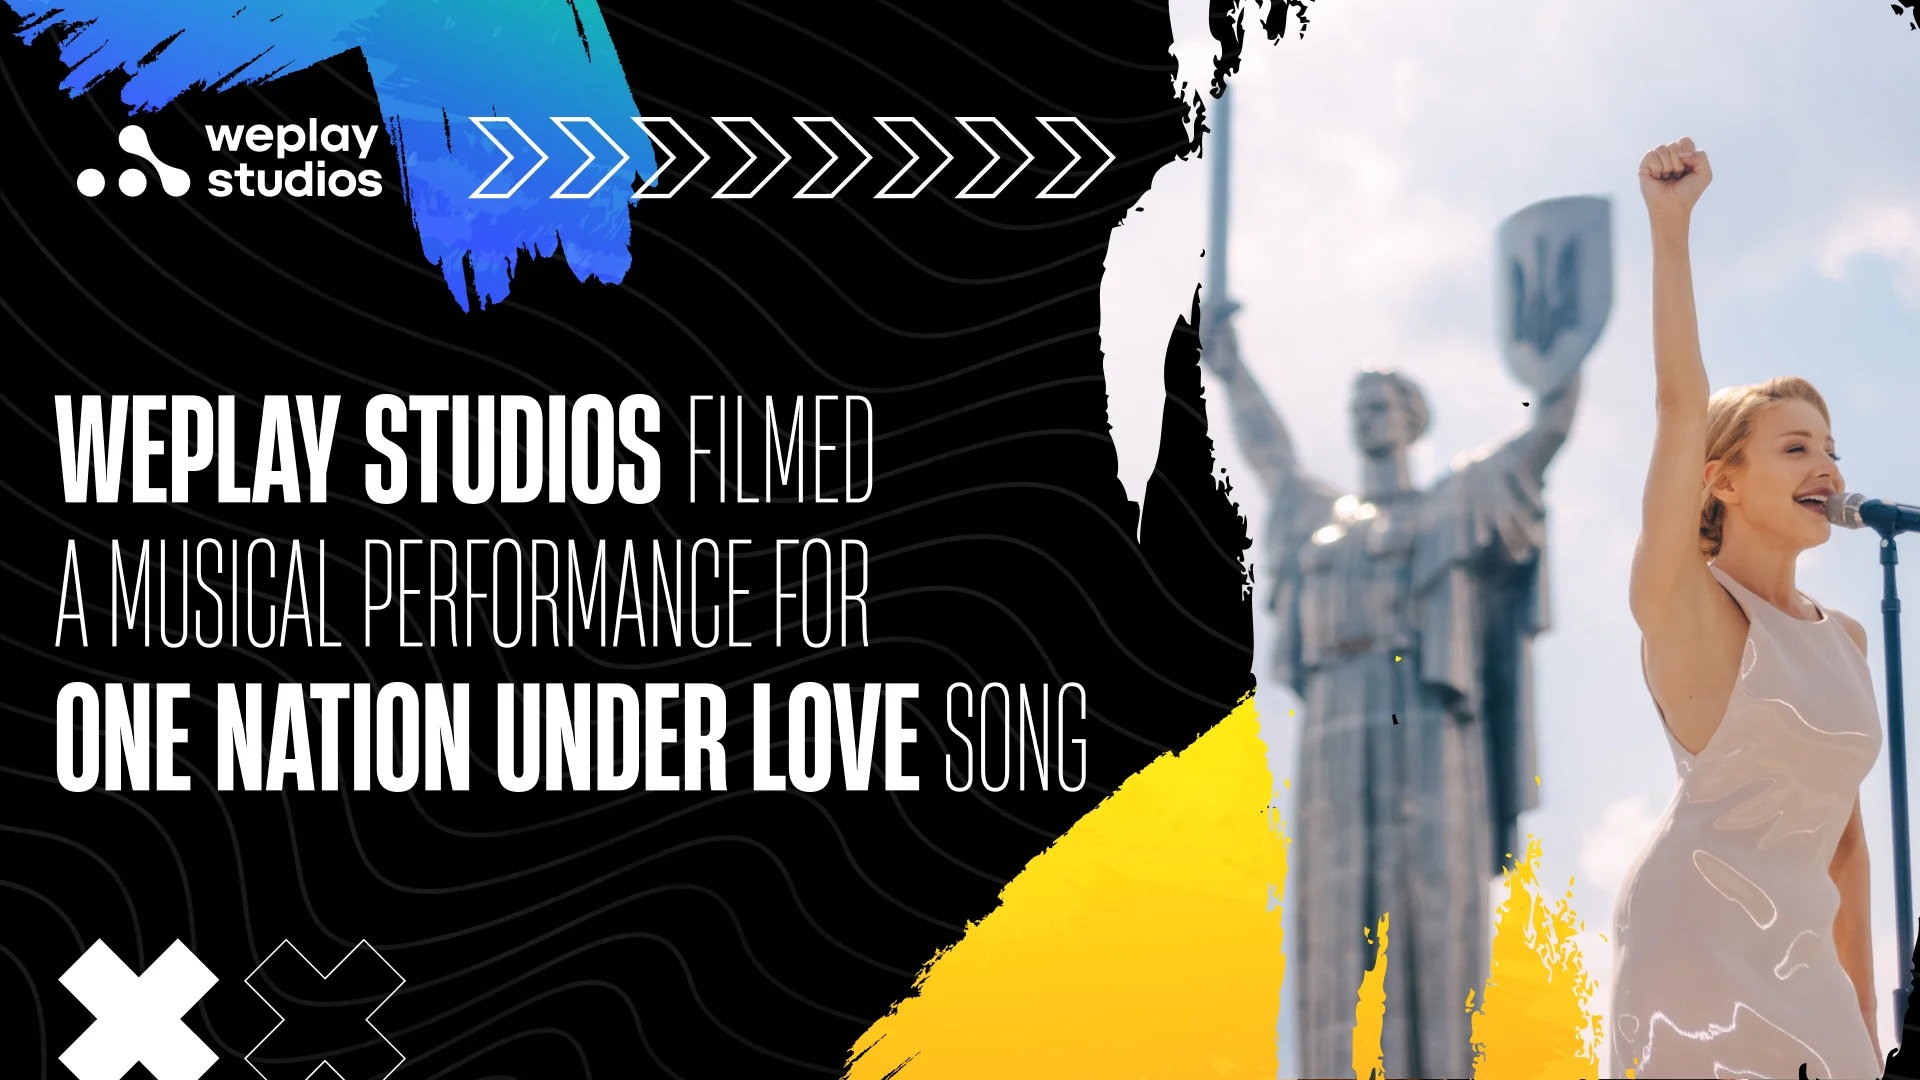 WePlay Studios filmed a musical performance for Diane Warren and Tina Karol's song, One Nation Under Love. Visual: WePlay Holding